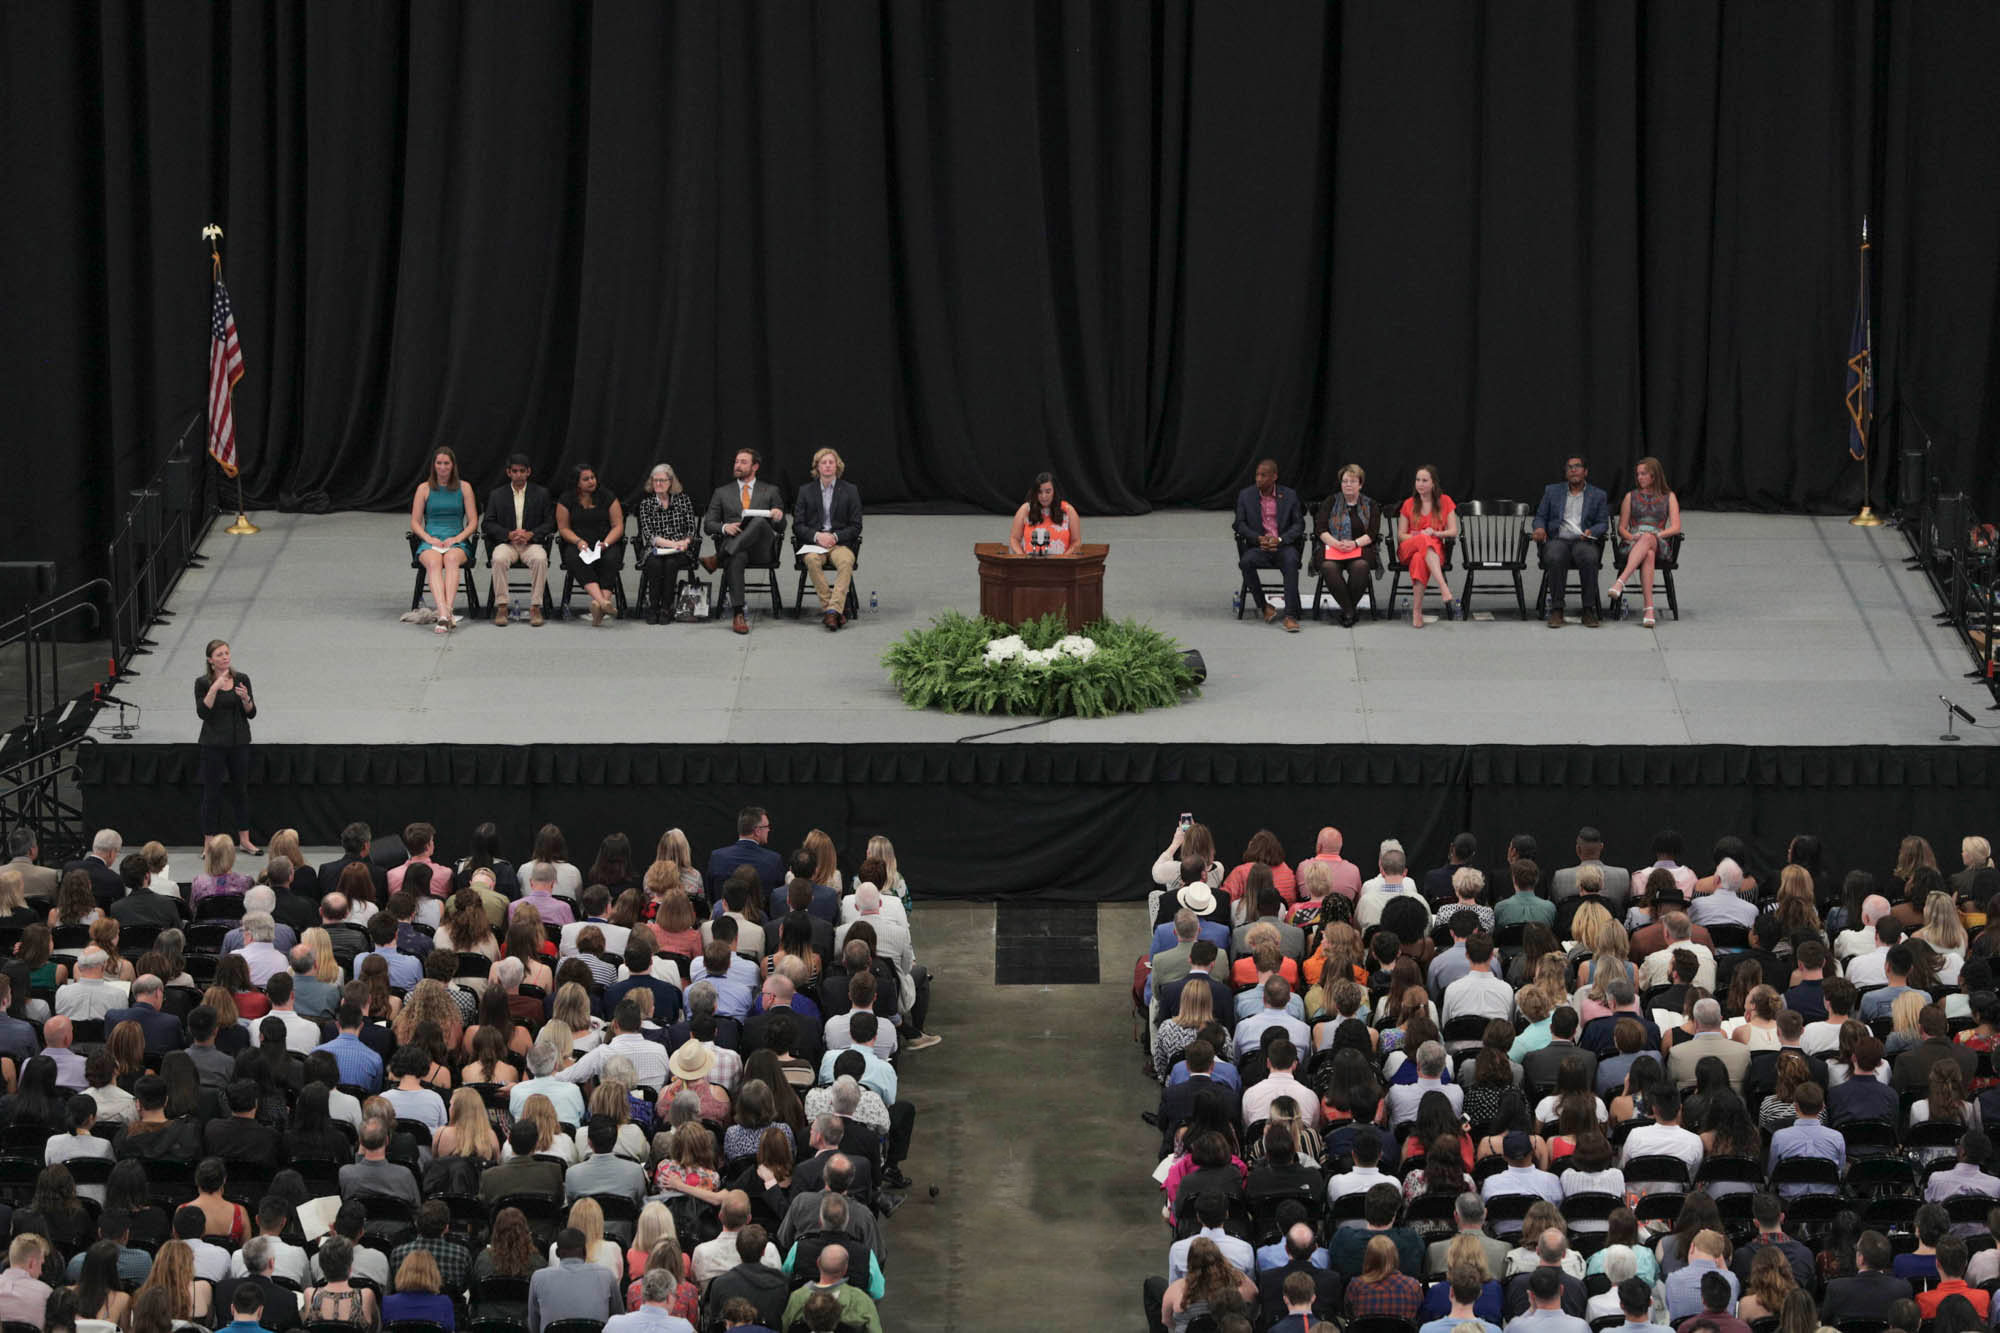 Students and presenters on stage with one speaking to a crowd from the podium